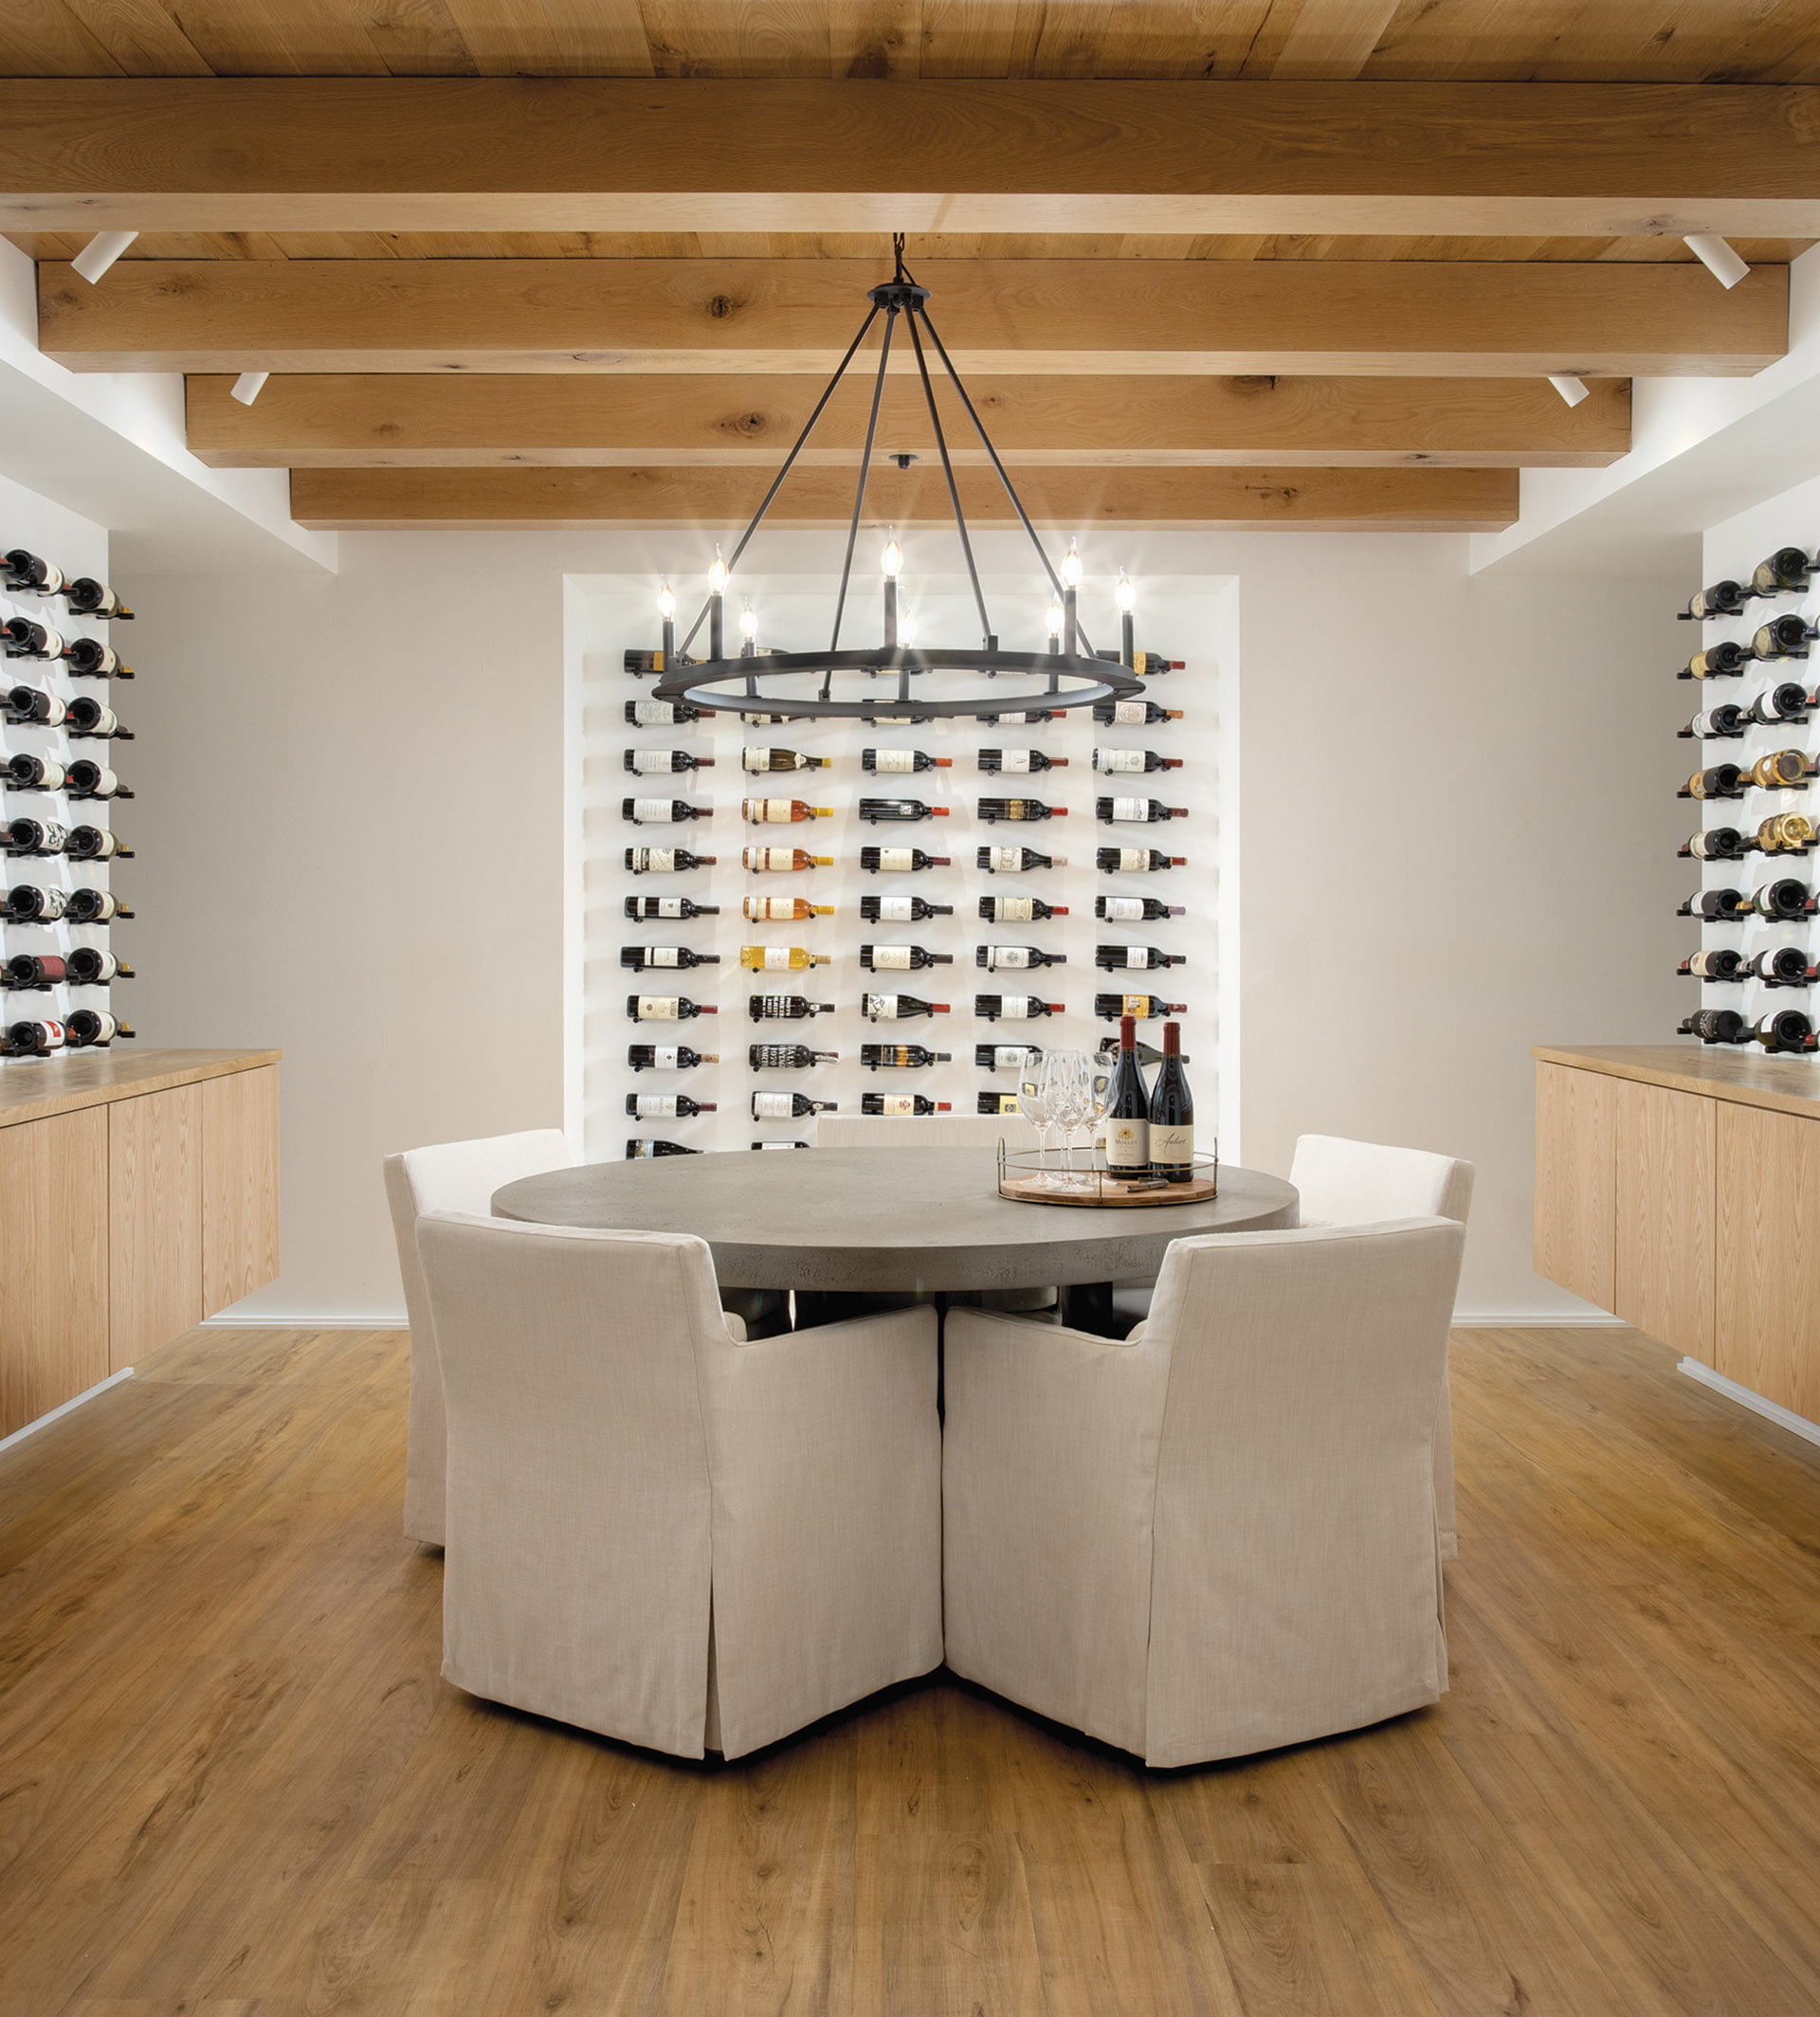 Wine cellar features a tasting room